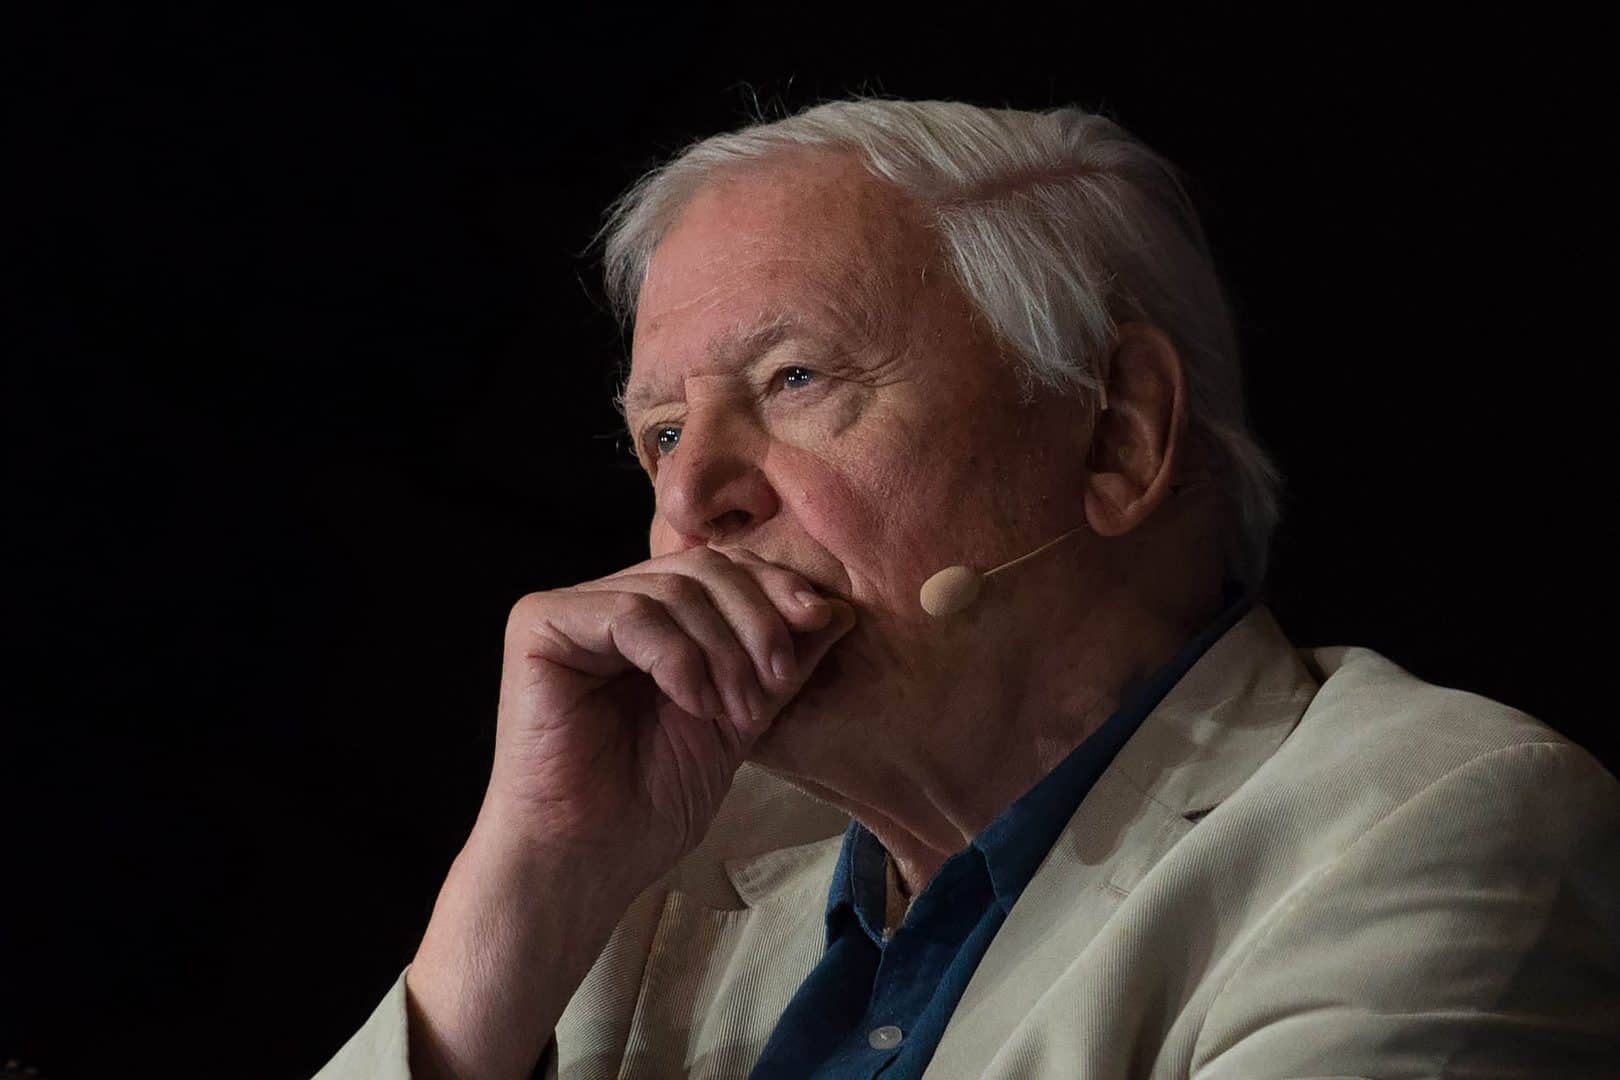 David Attenborough urges government to heed Britain’s first citizens’ assembly on climate crisis